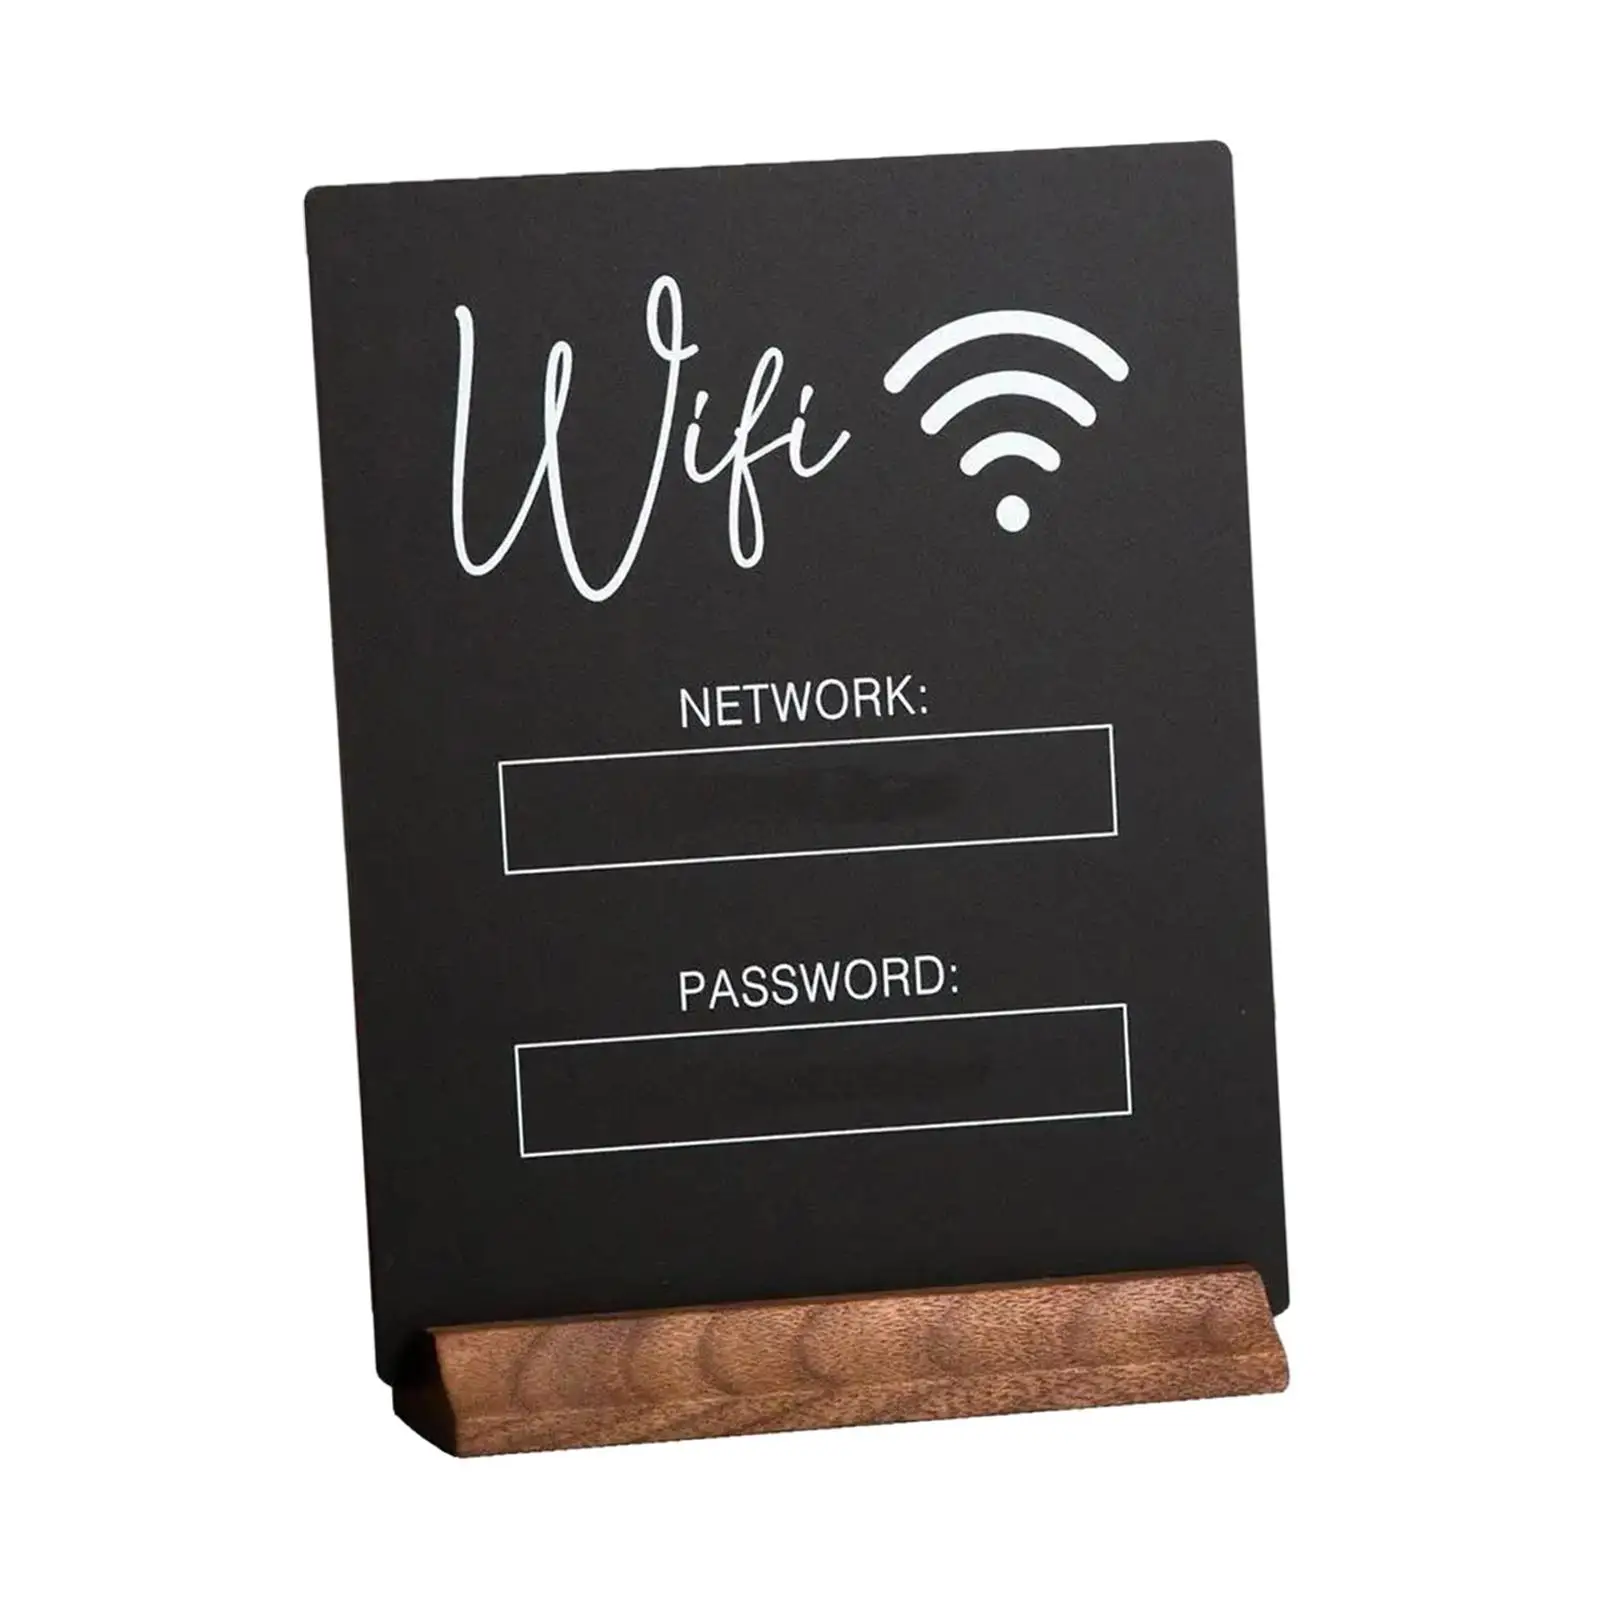 WiFi Password Sign Multifunctional Portable Freestanding Reusable Table Display Holder for Office Banquet Home Guests Desktop